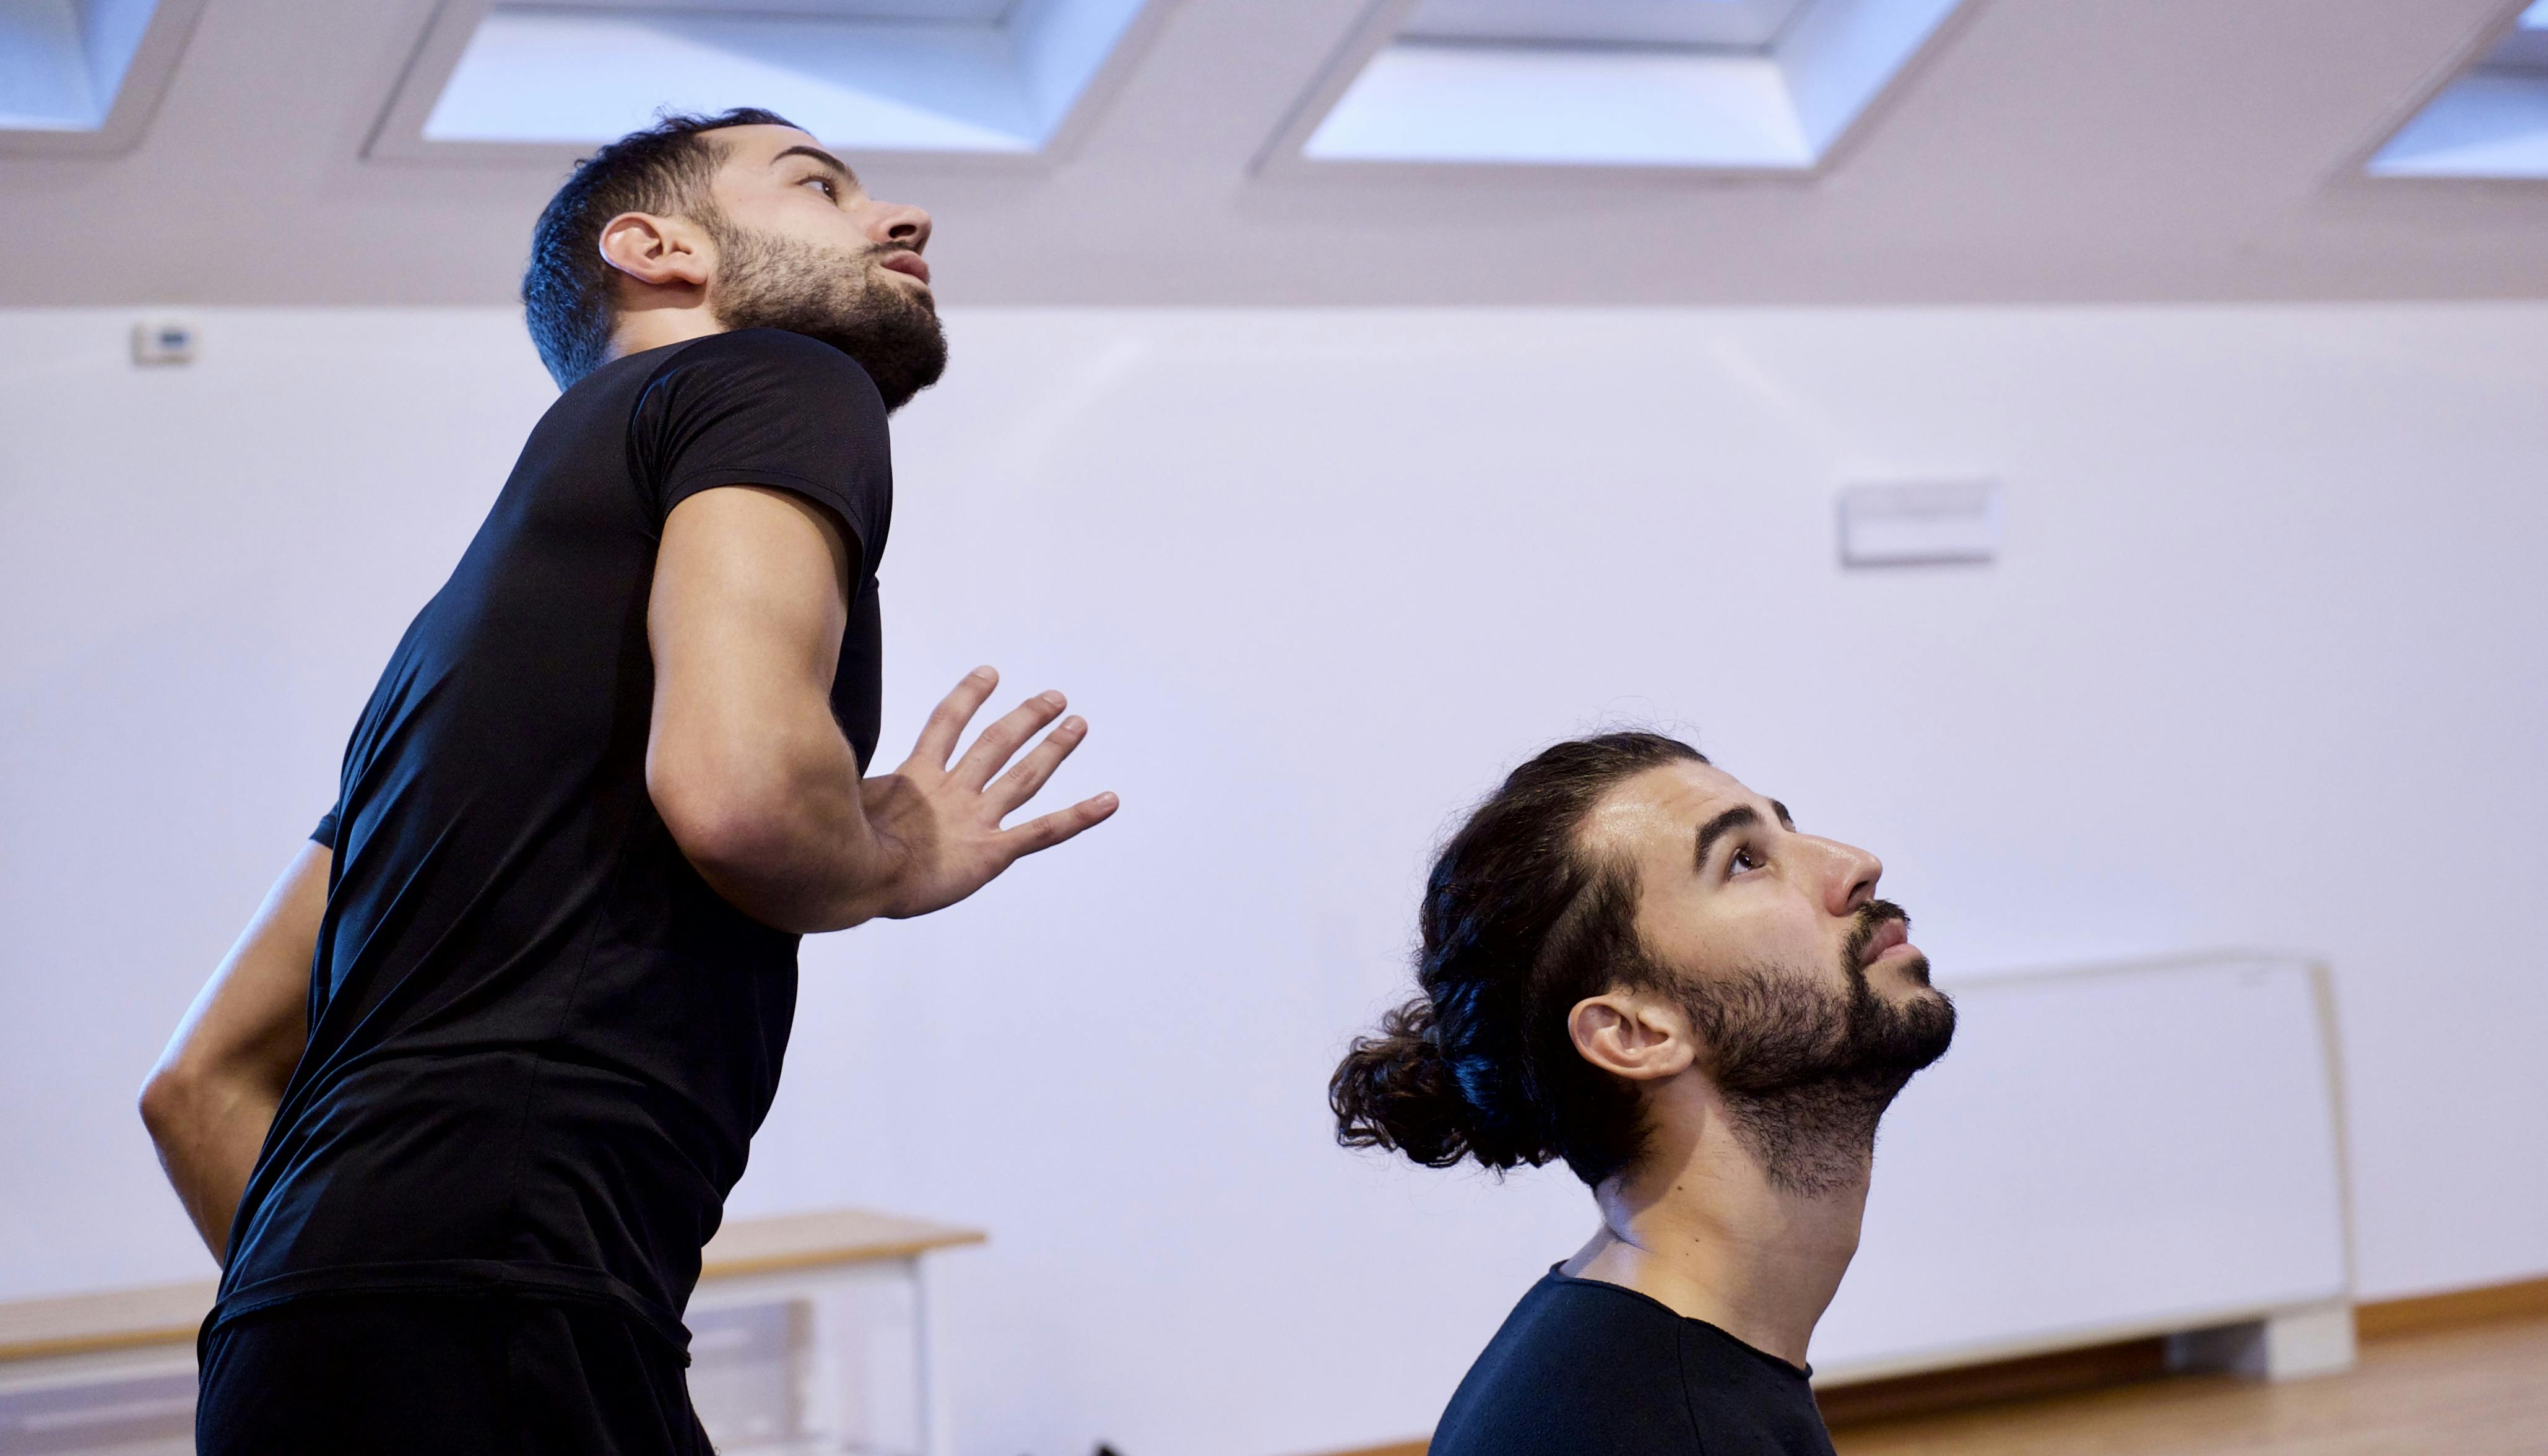 Rehearsal in the Studio. The two dancers are looking slightly upwards. They are in suits, we can see the whole upper part of one's body, only the head and shoulders of the other.